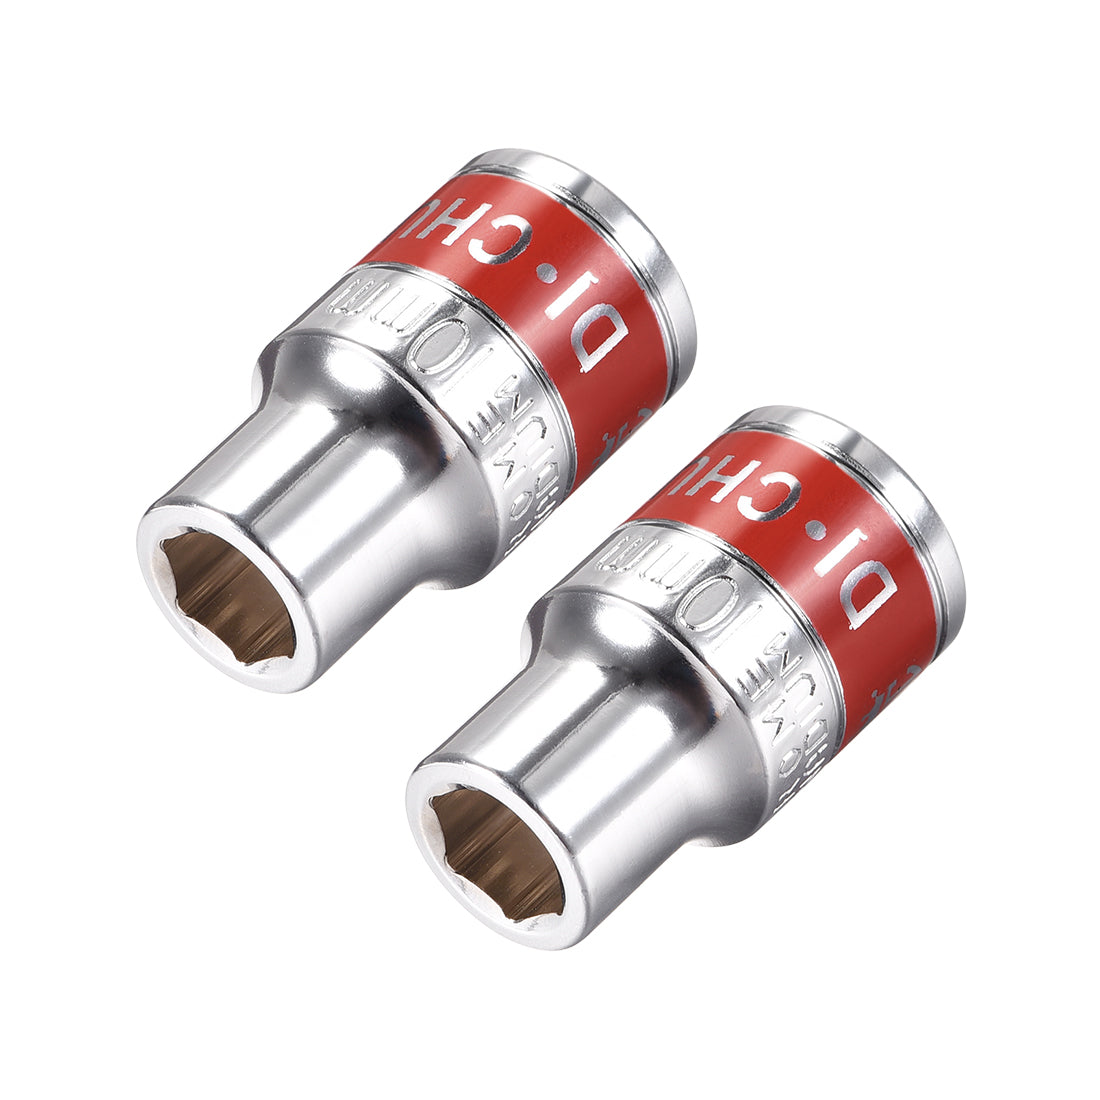 uxcell Uxcell 2 Pcs 1/2-Inch Drive by 10mm Shallow Socket with Red Band, Cr-V, 6-Point, Metric